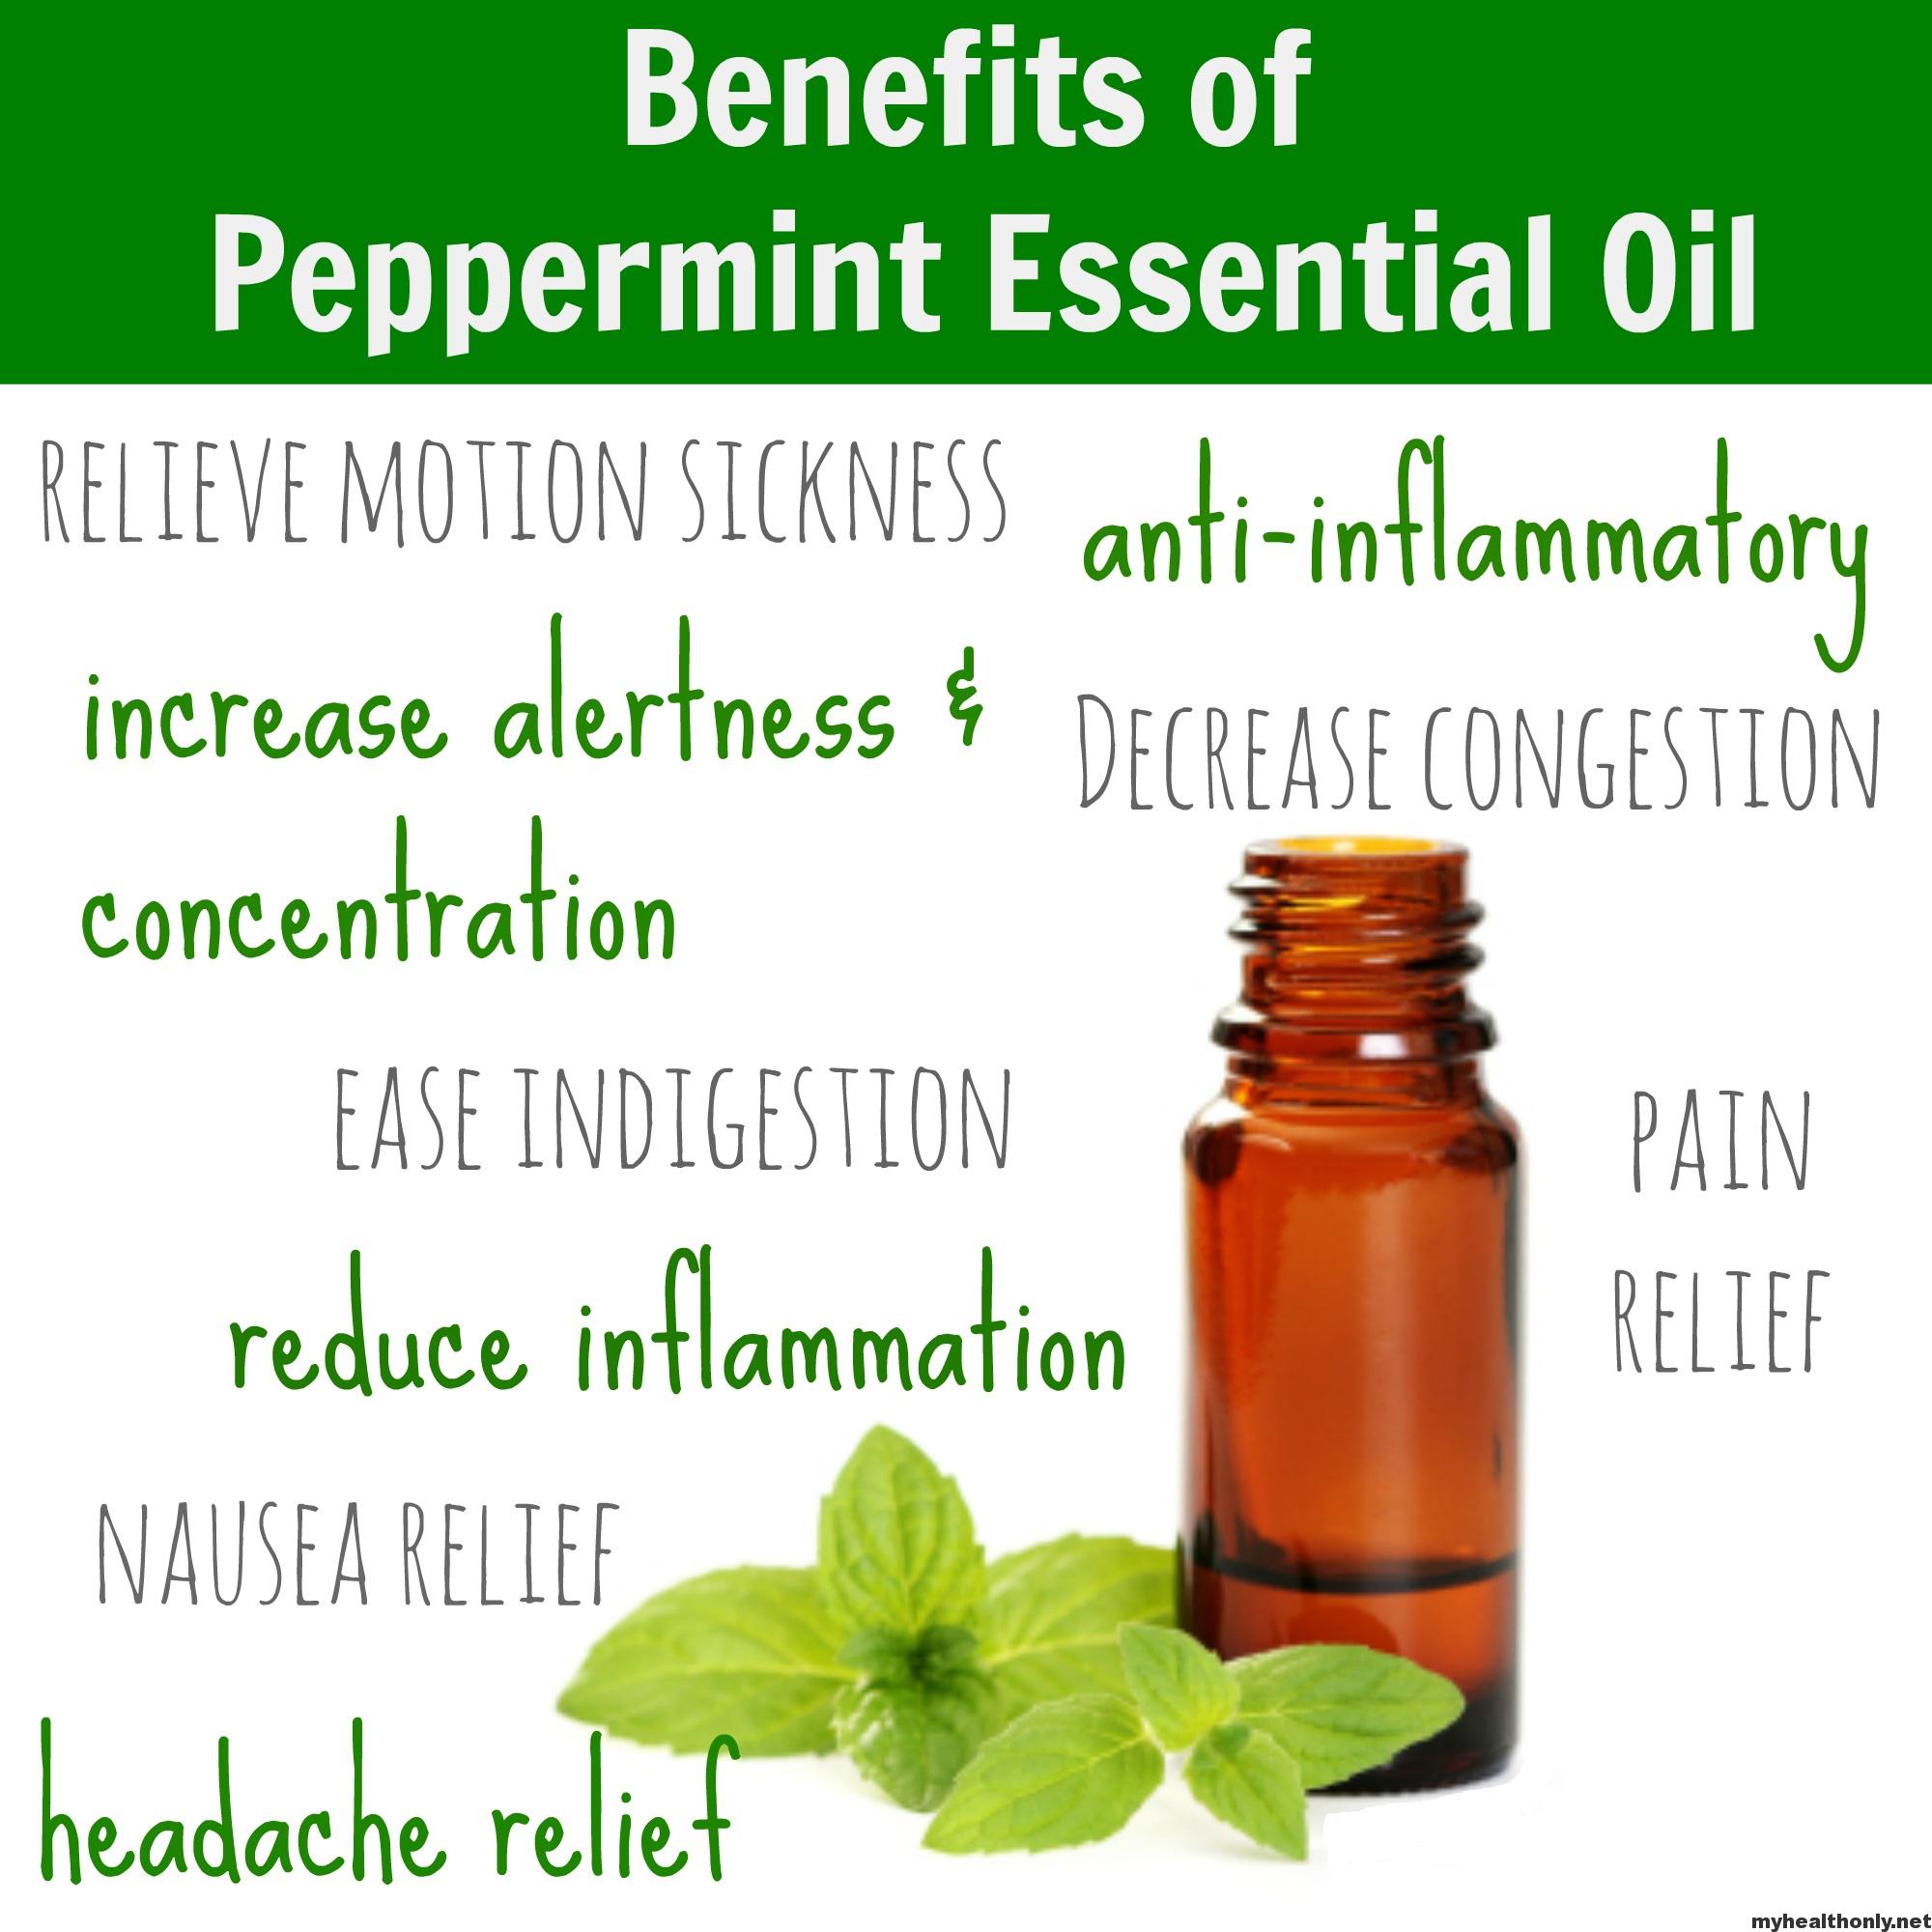 peppermint oil benefits for thyroid